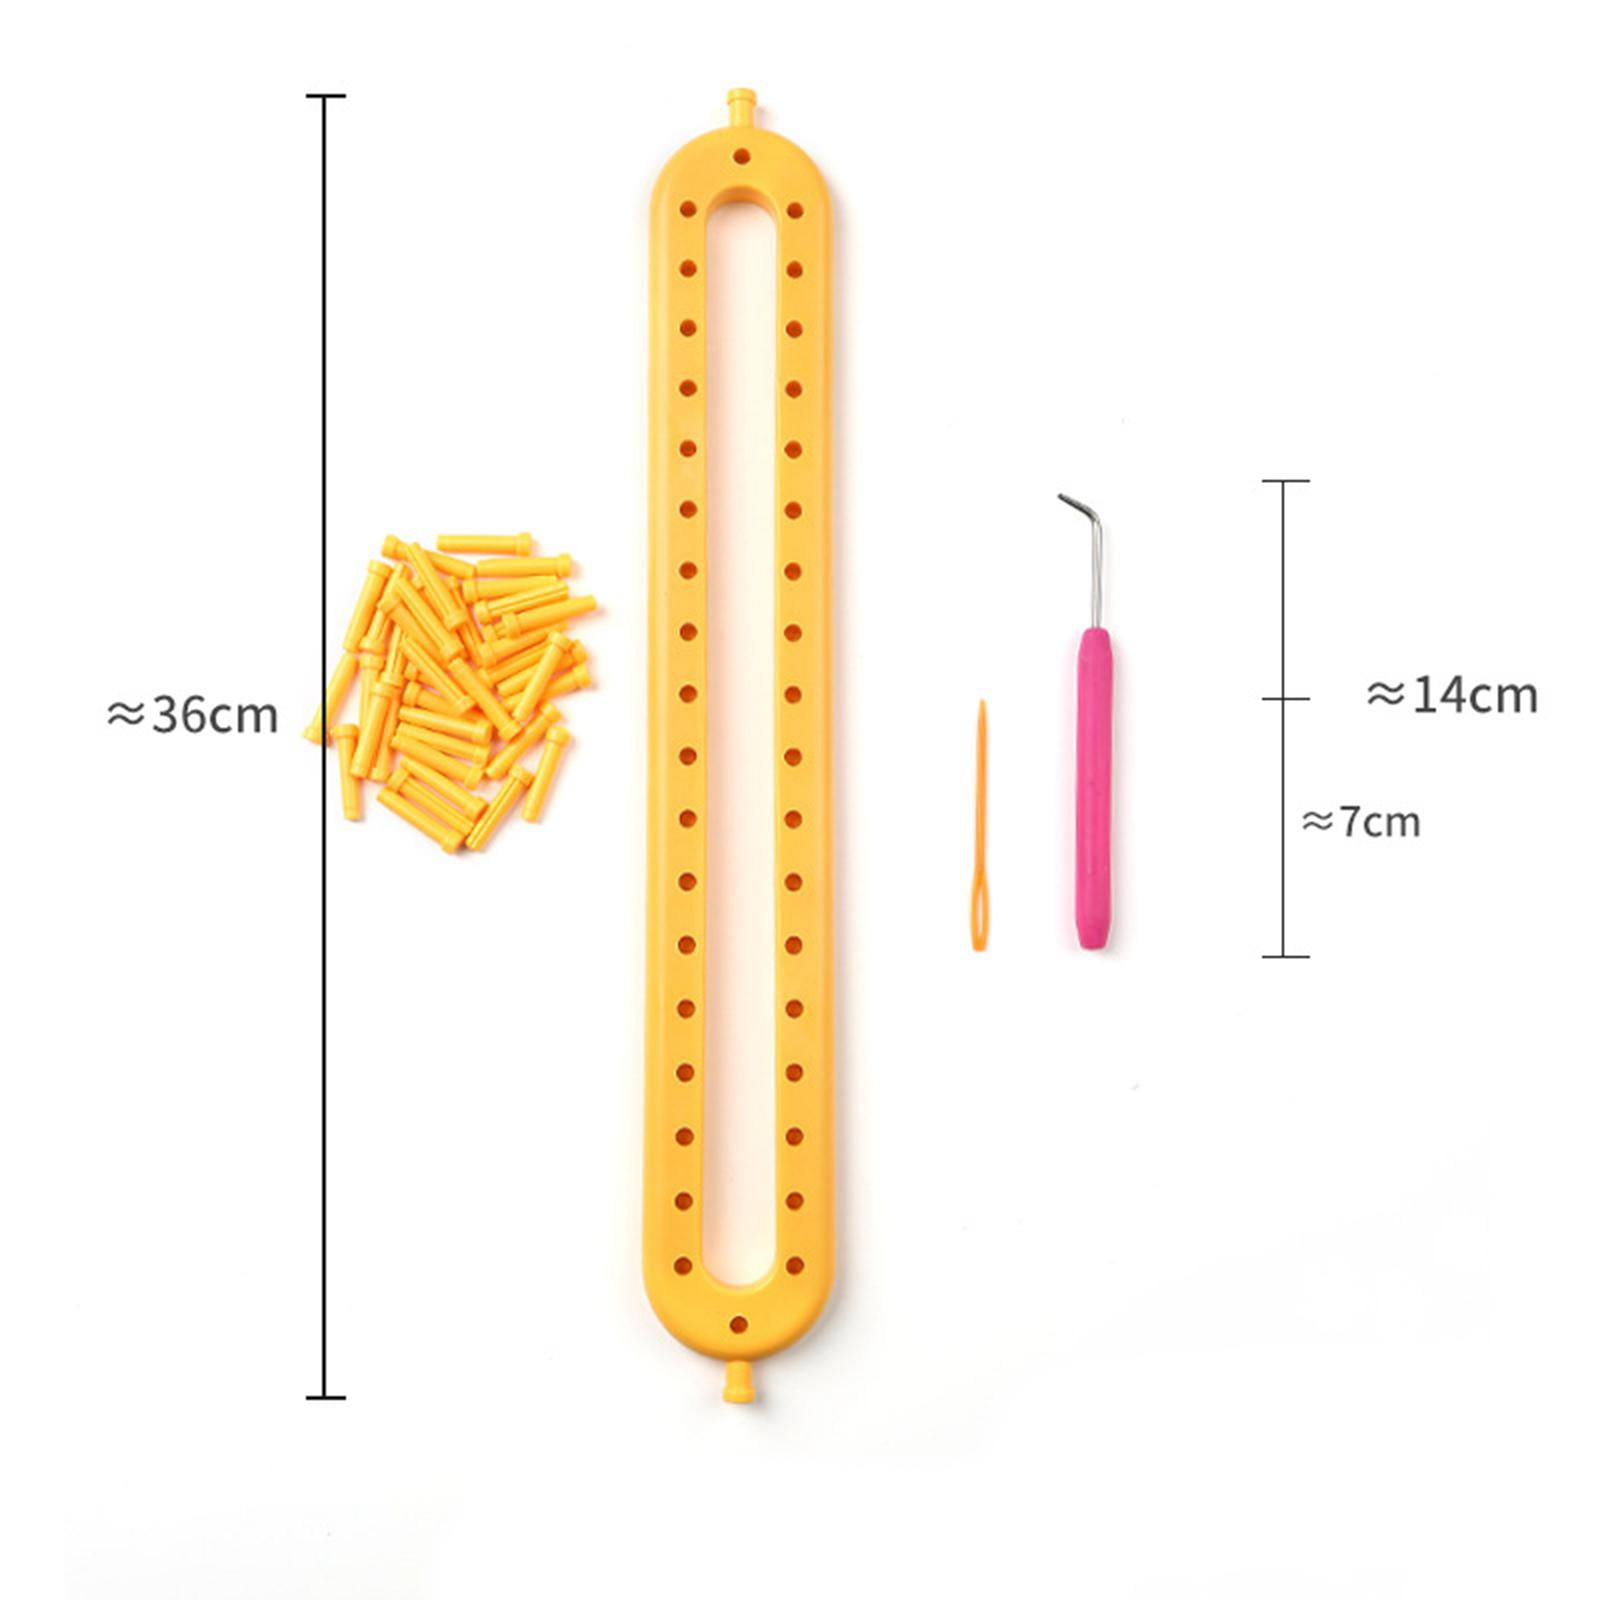 Crochet Hat Maker - Fluff Ball Weaver Crafts Tool - Quick Knit Loom Sewing  Accessories, Craft Knitting Machine for Kids and Adult Spann